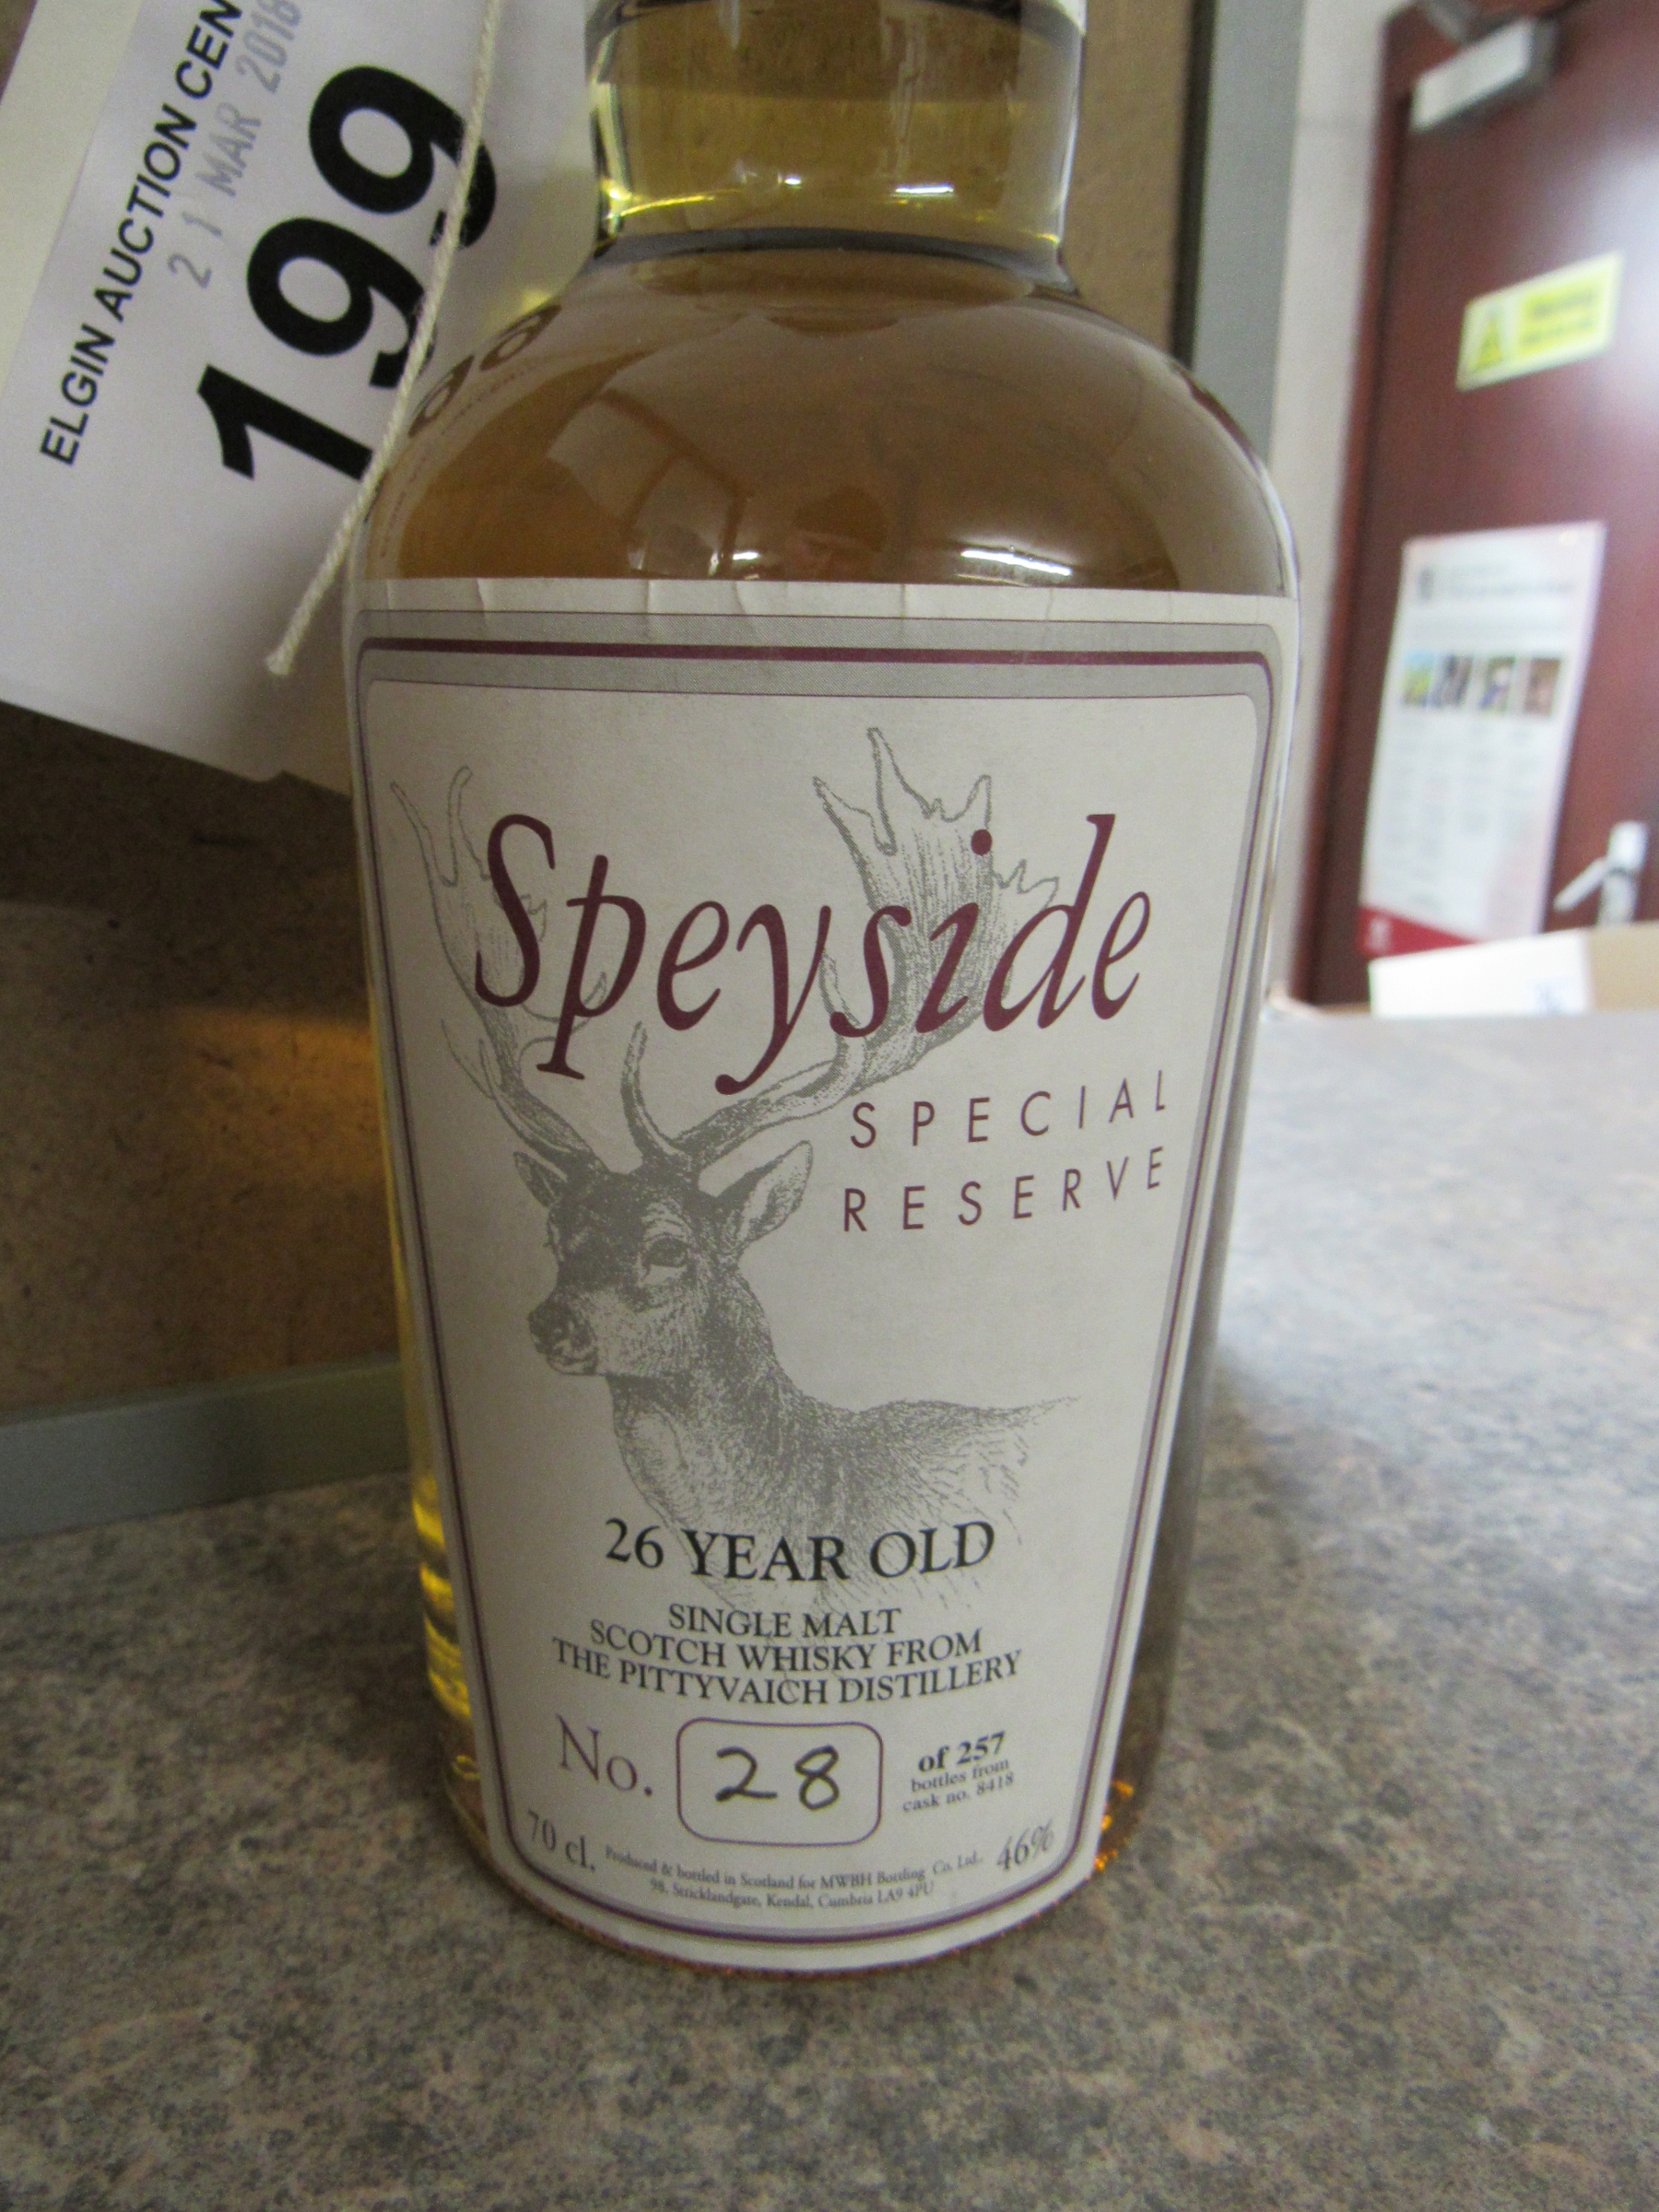 70 CL SPEYSIDE SPECIAL RESERVE 28 0F 257 26YO 46% VOL - Image 4 of 4